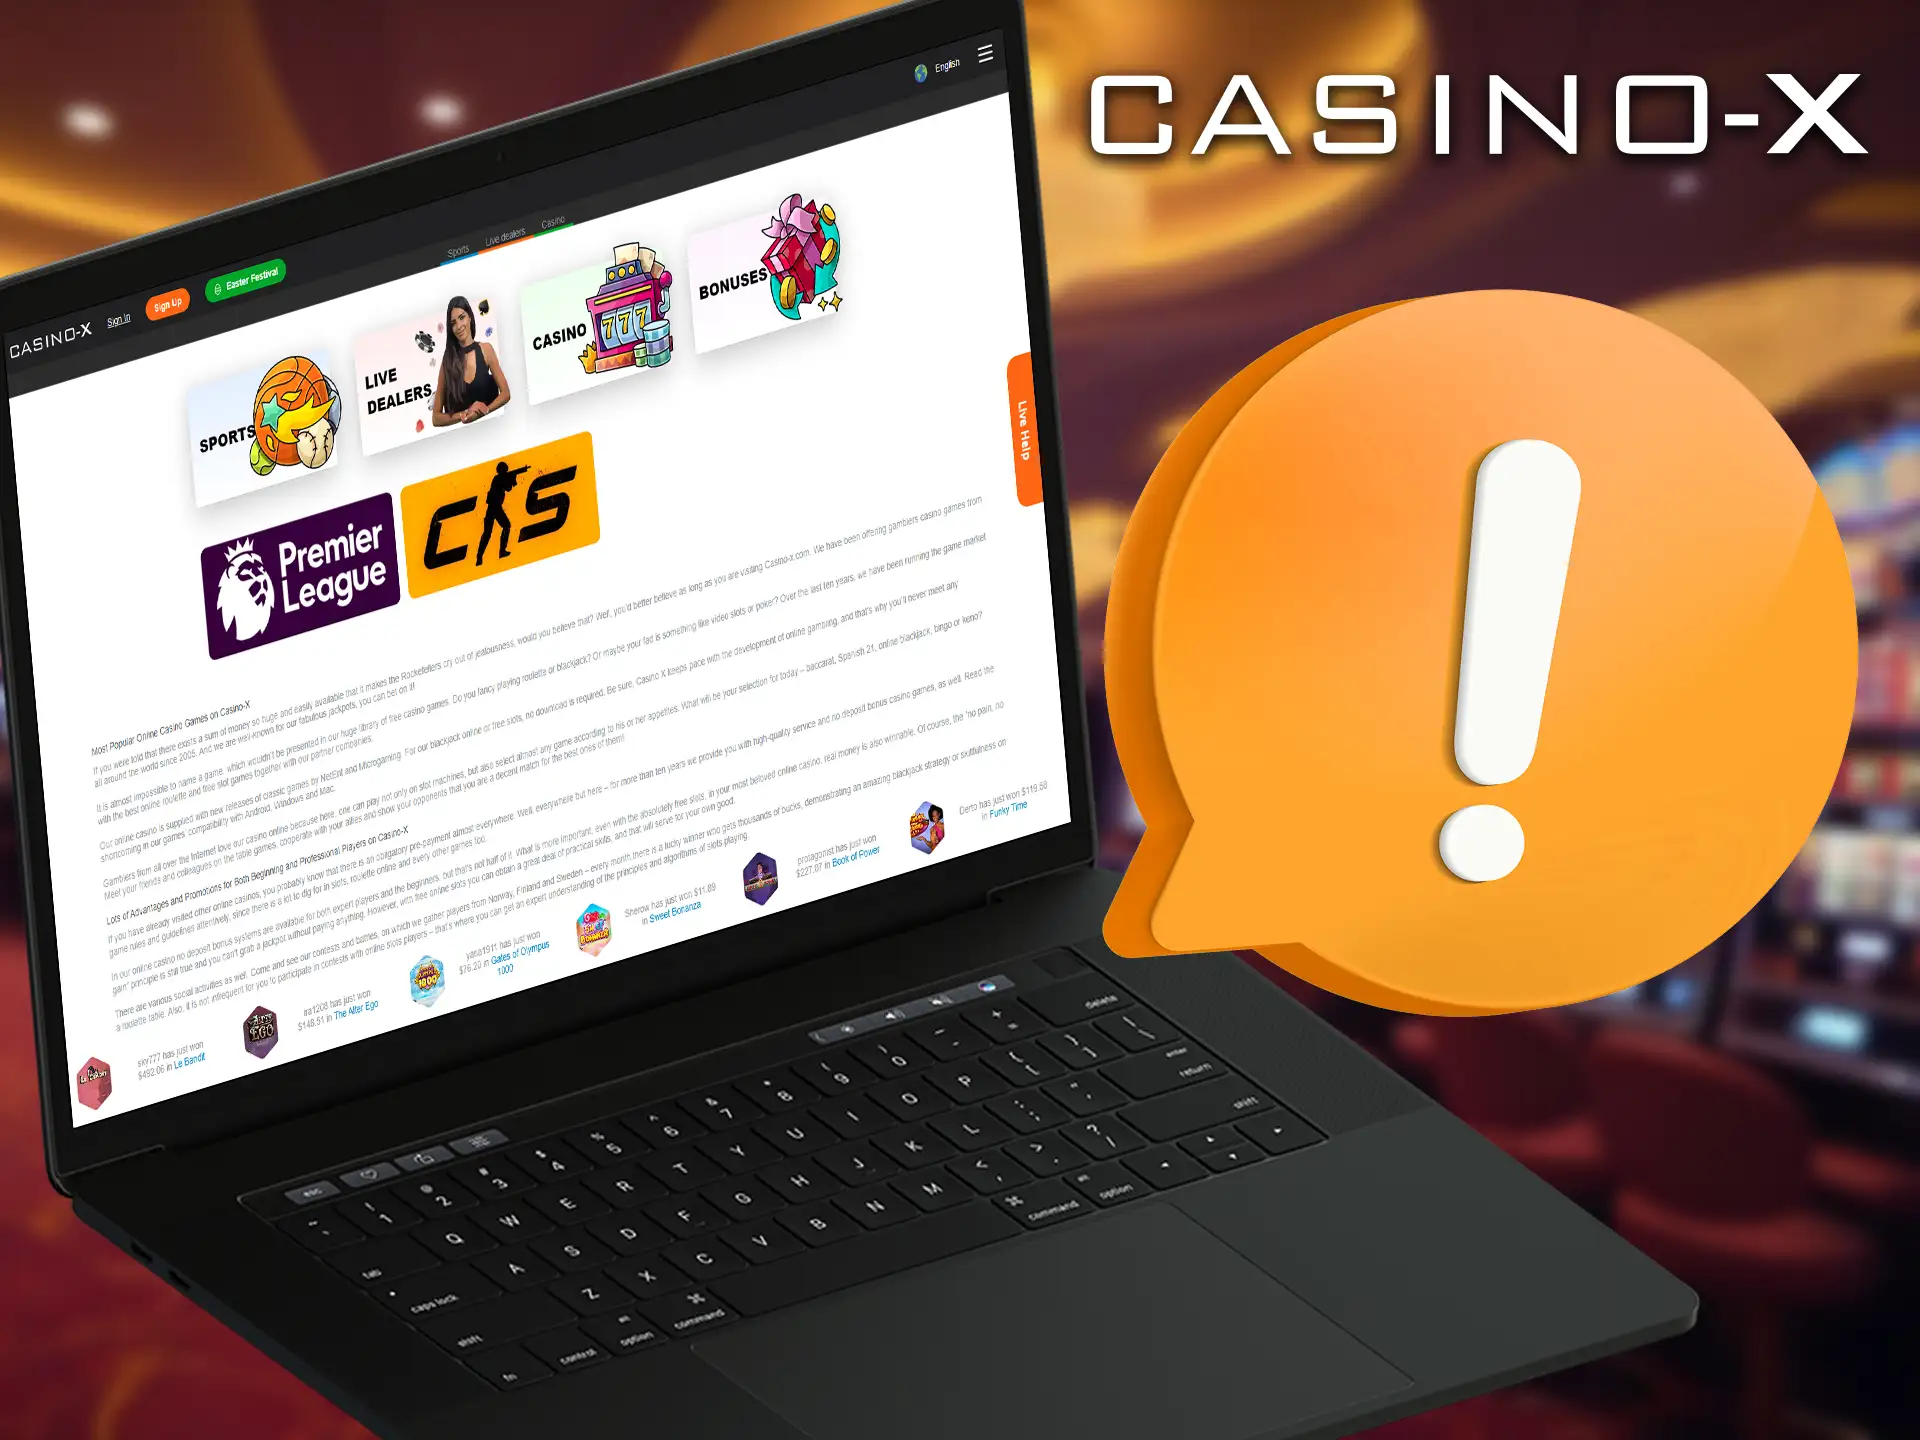 Casino-X brings you years of experience in the online gambling market.